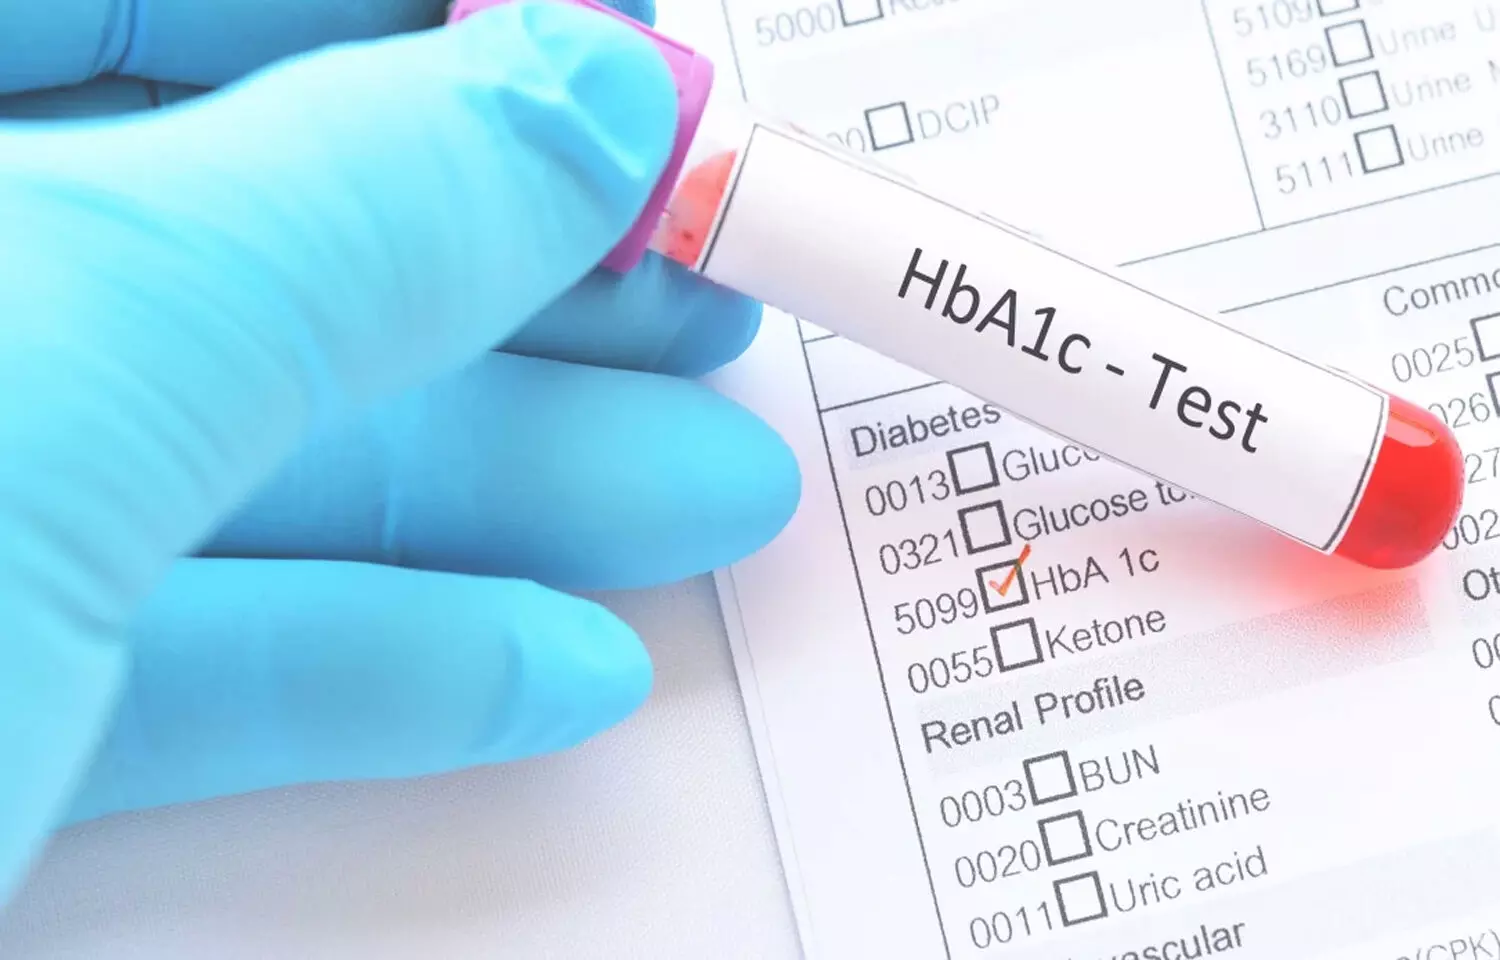 Treat anemia first, before using HbA1C for accurate estimation of blood sugar